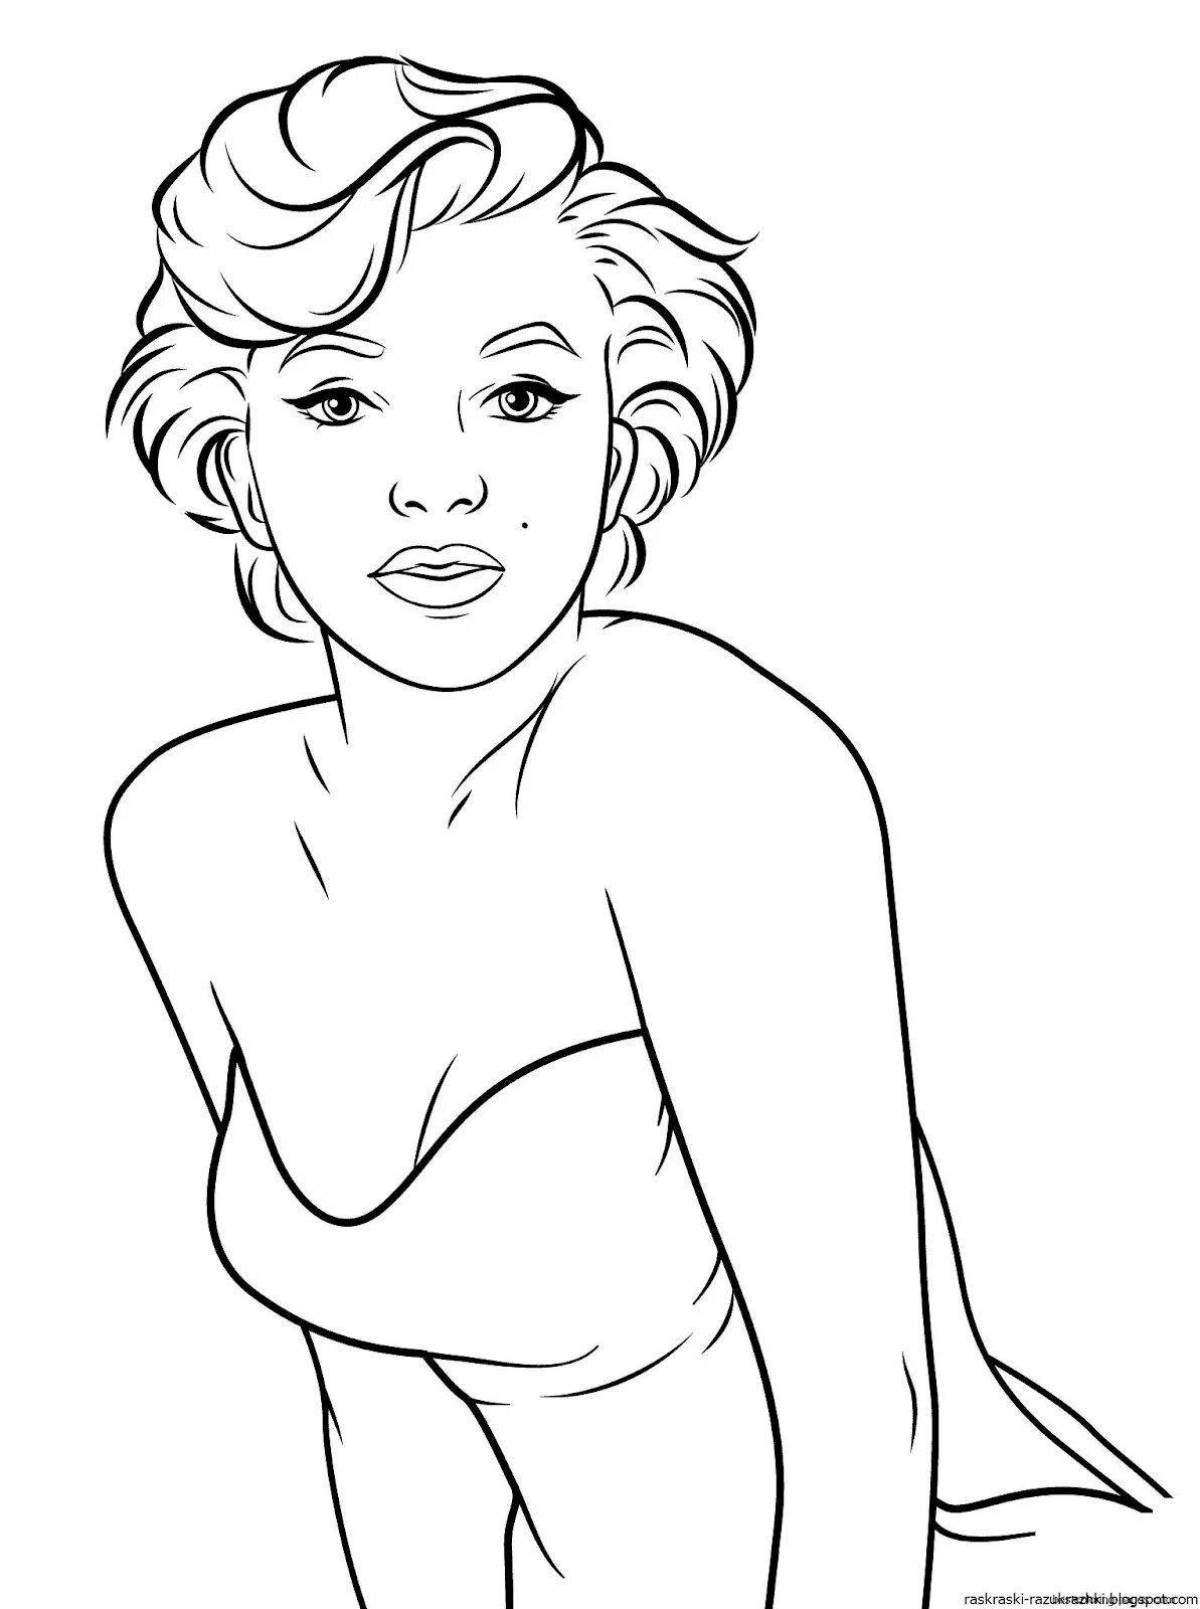 Cute celebrity coloring pages